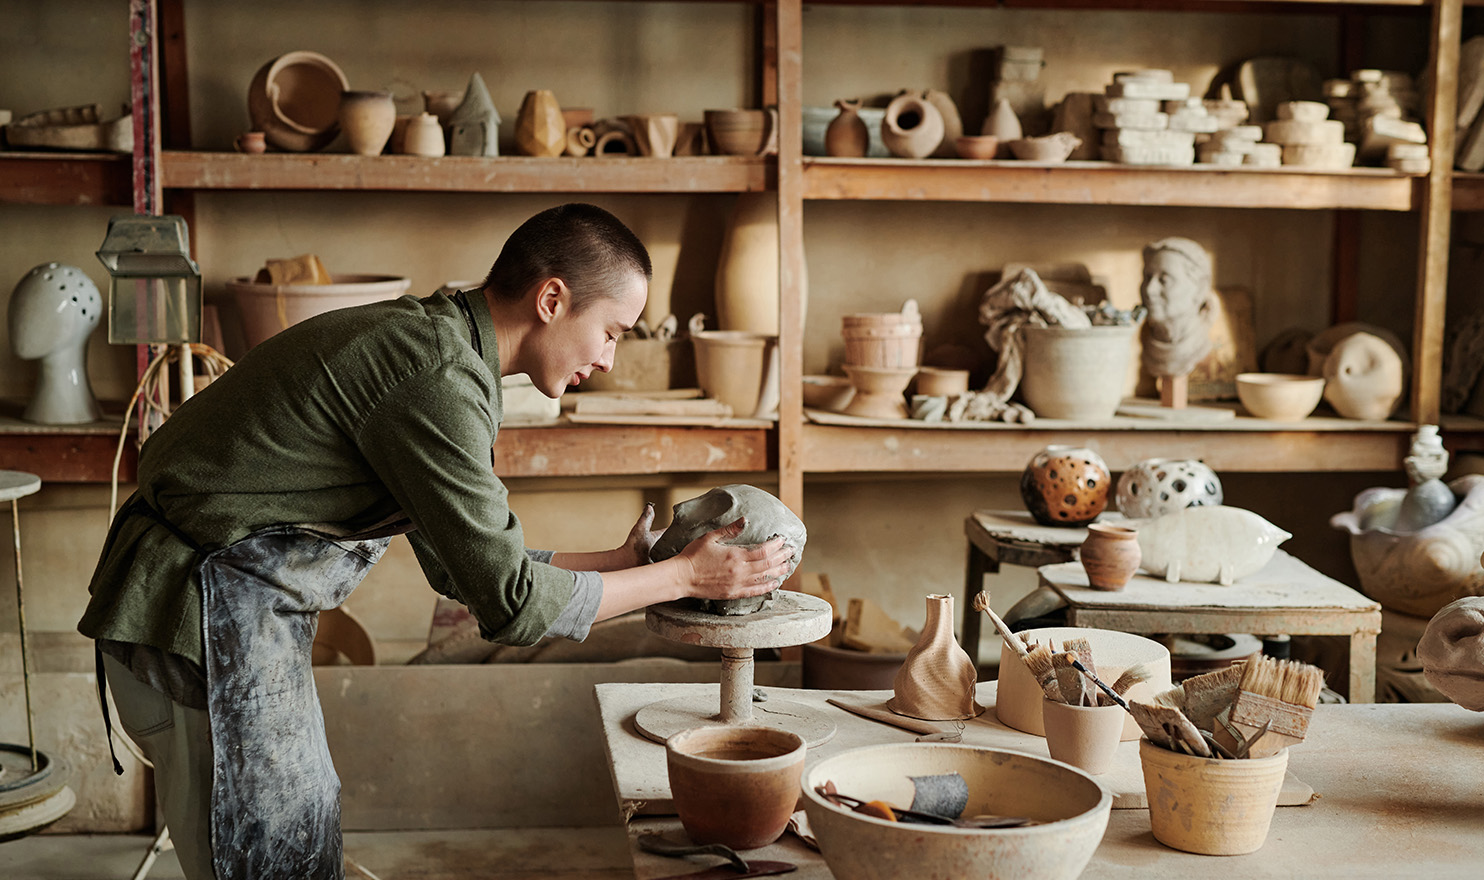 An artist is in his workshop leaning over a table as he focuses on the pottery piece he is making. He is surrounded by other pieces he has made that are on the table and on the shelves behind him.